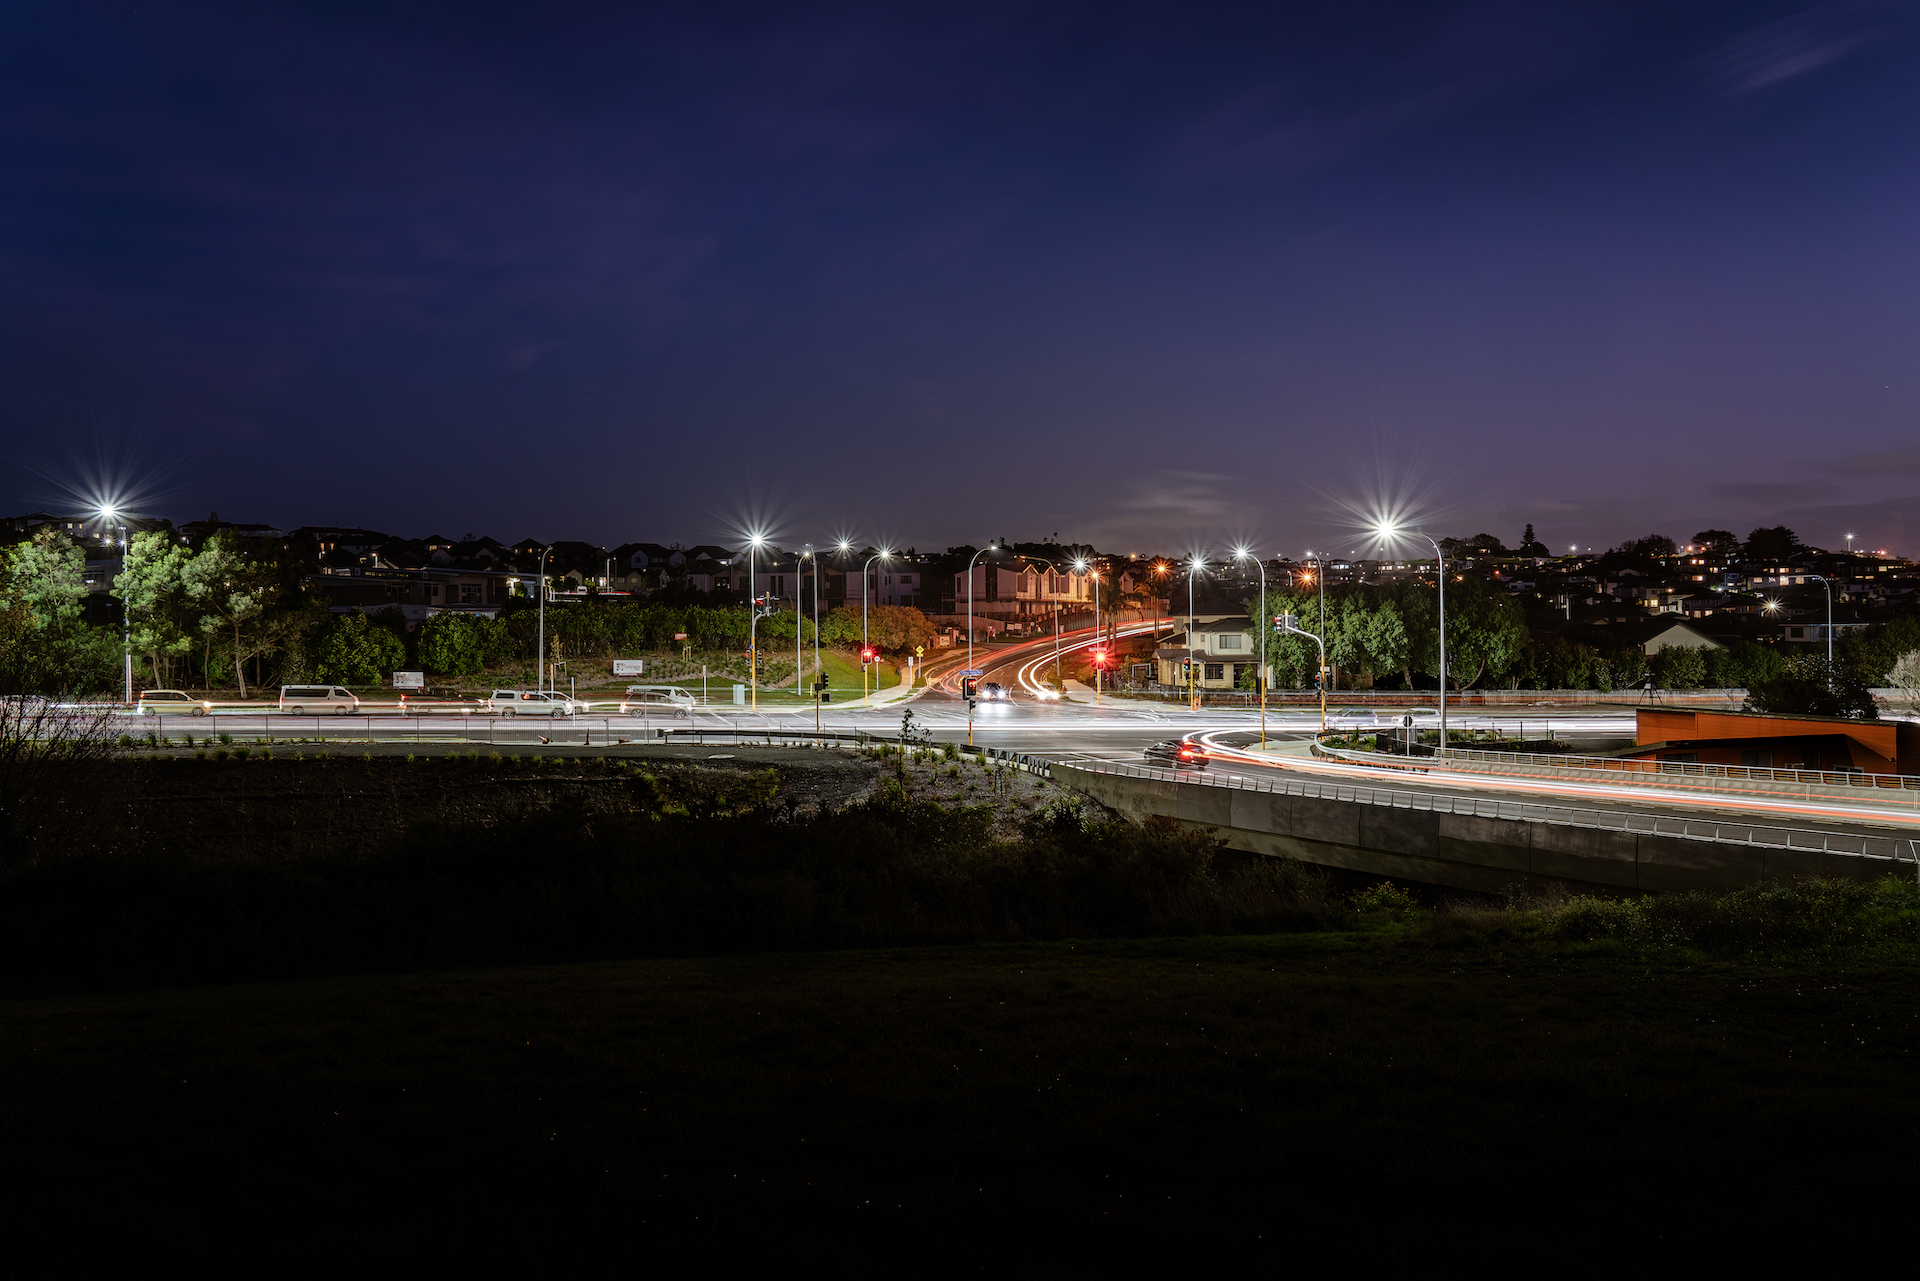 Medaillon Drive intersection at night illuminated by ibex lighting solutions.